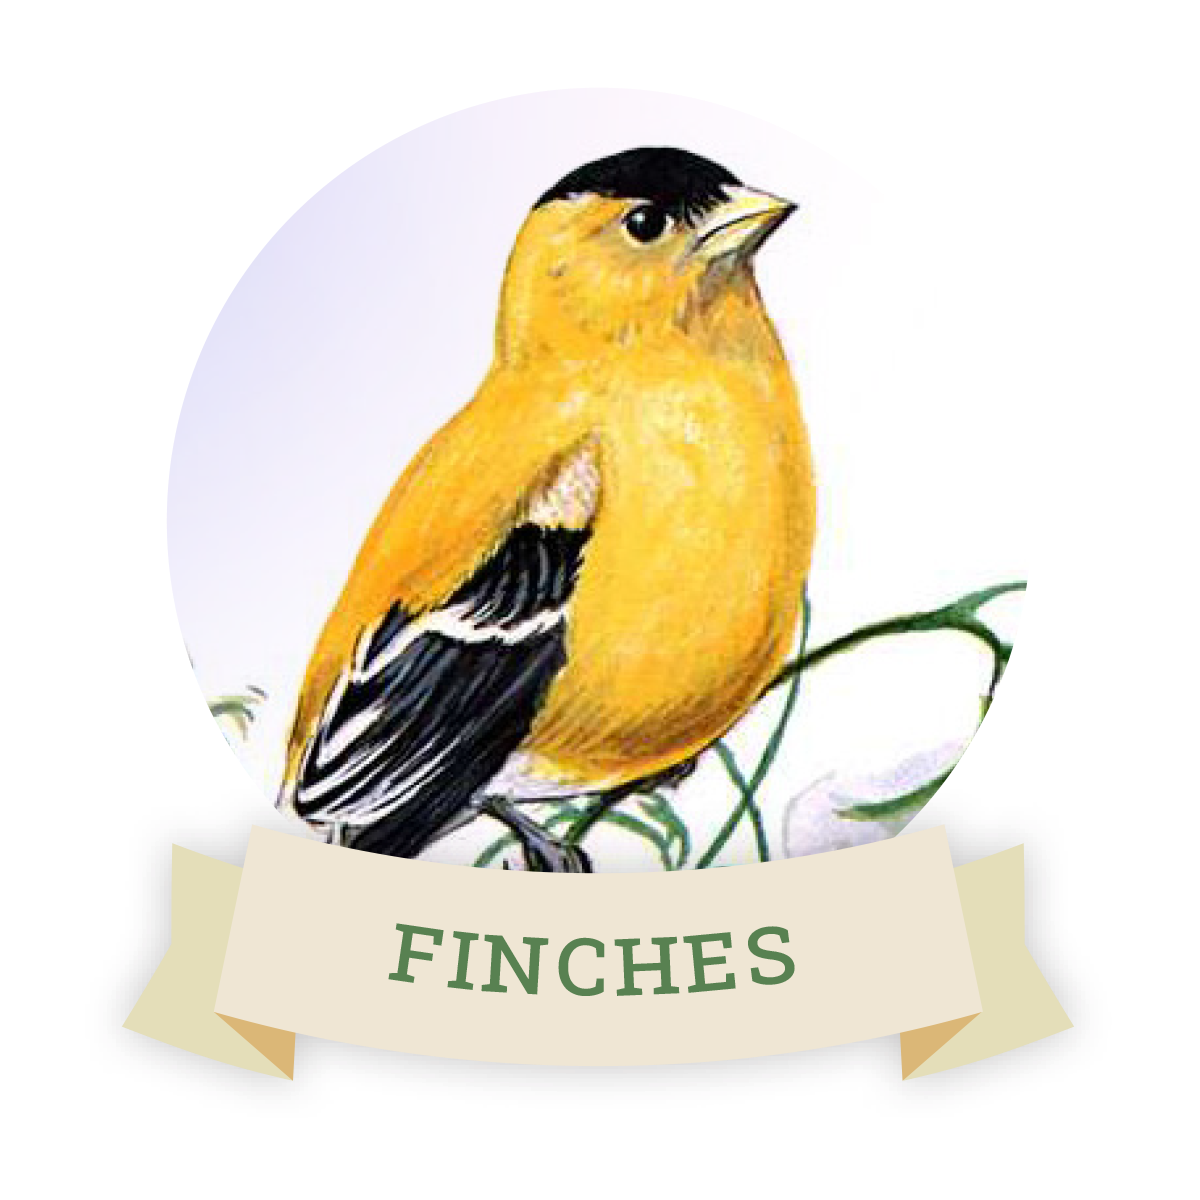 Image of a finch. Links to finch favorite food and feeders.